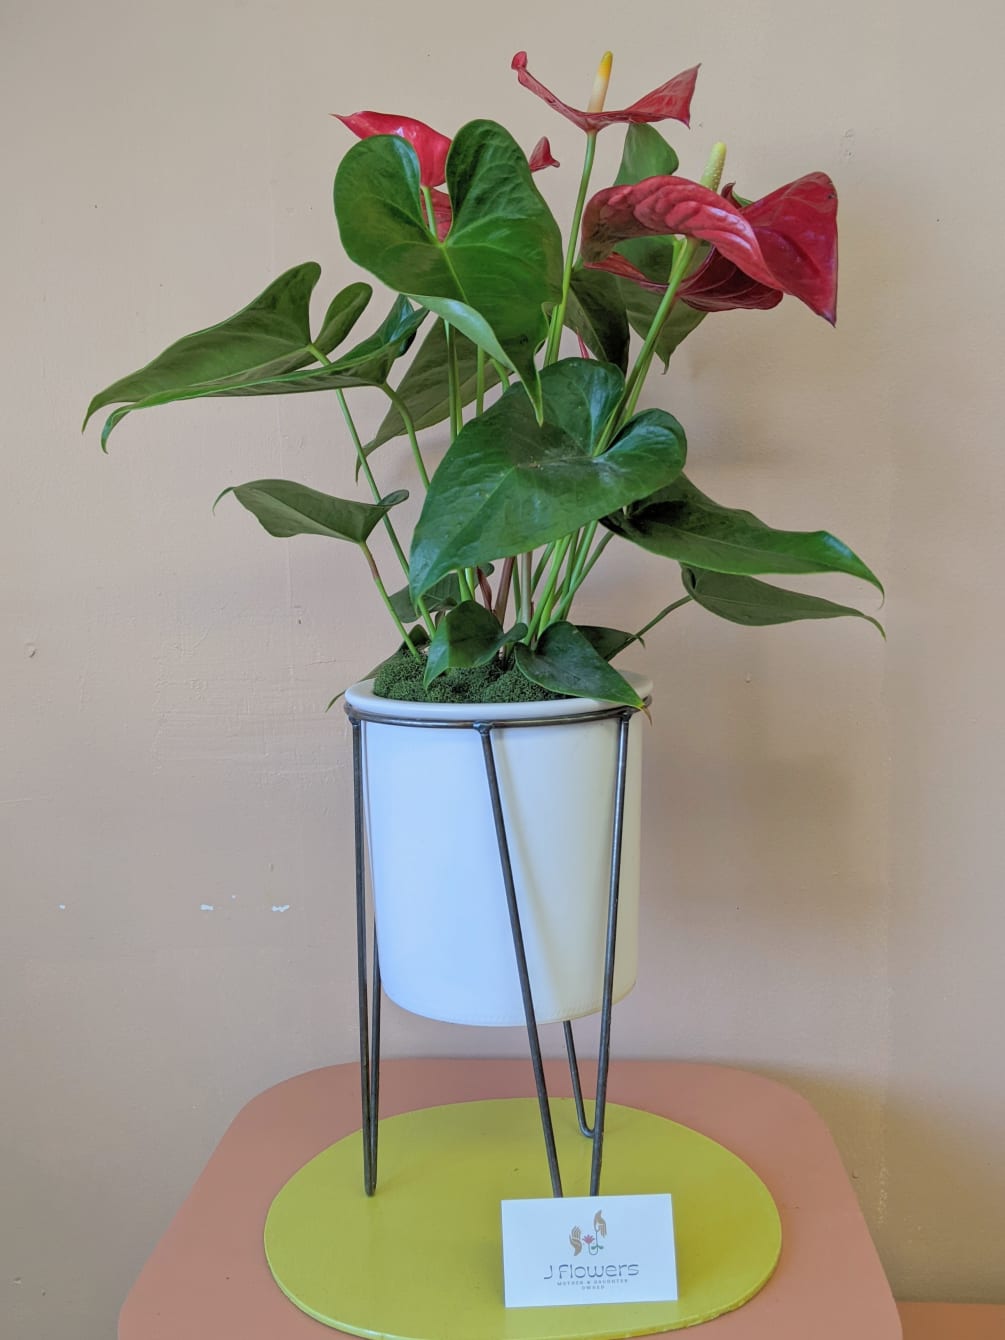 An Anthurium plant in a modern ceramic pot with wire legs. Measures